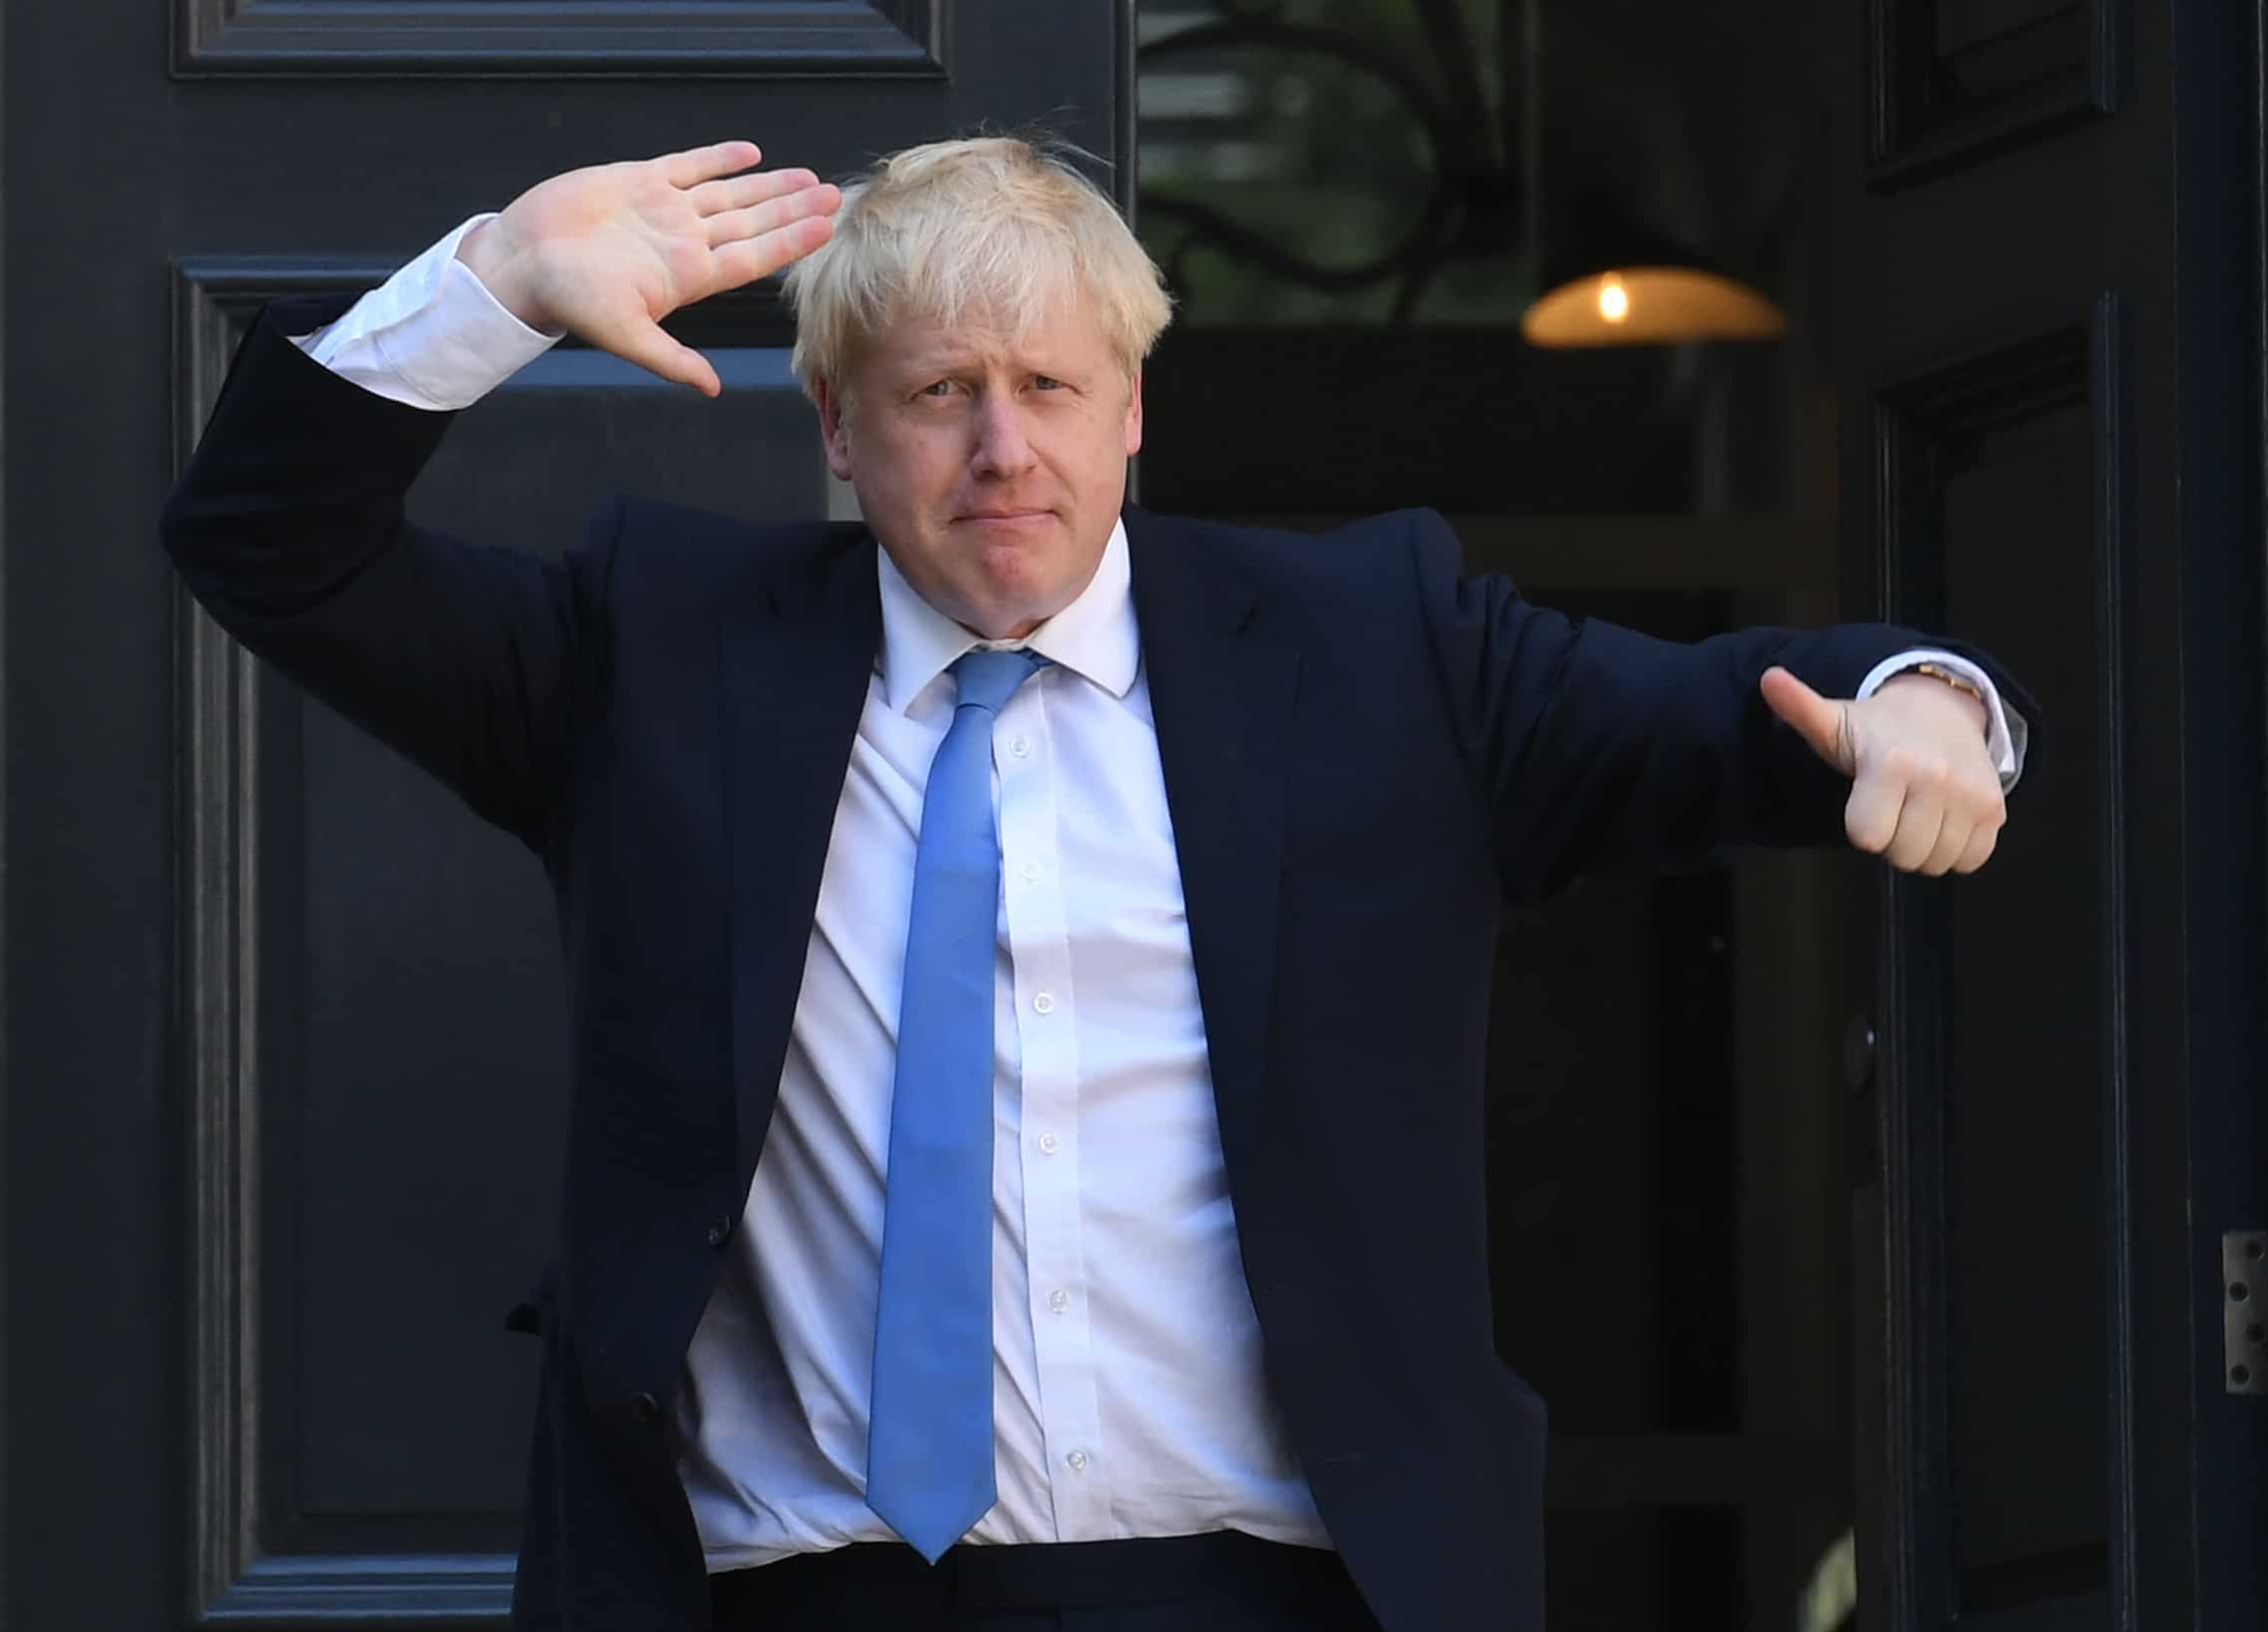 Two years of Boris: A look back over a turbulent premiership